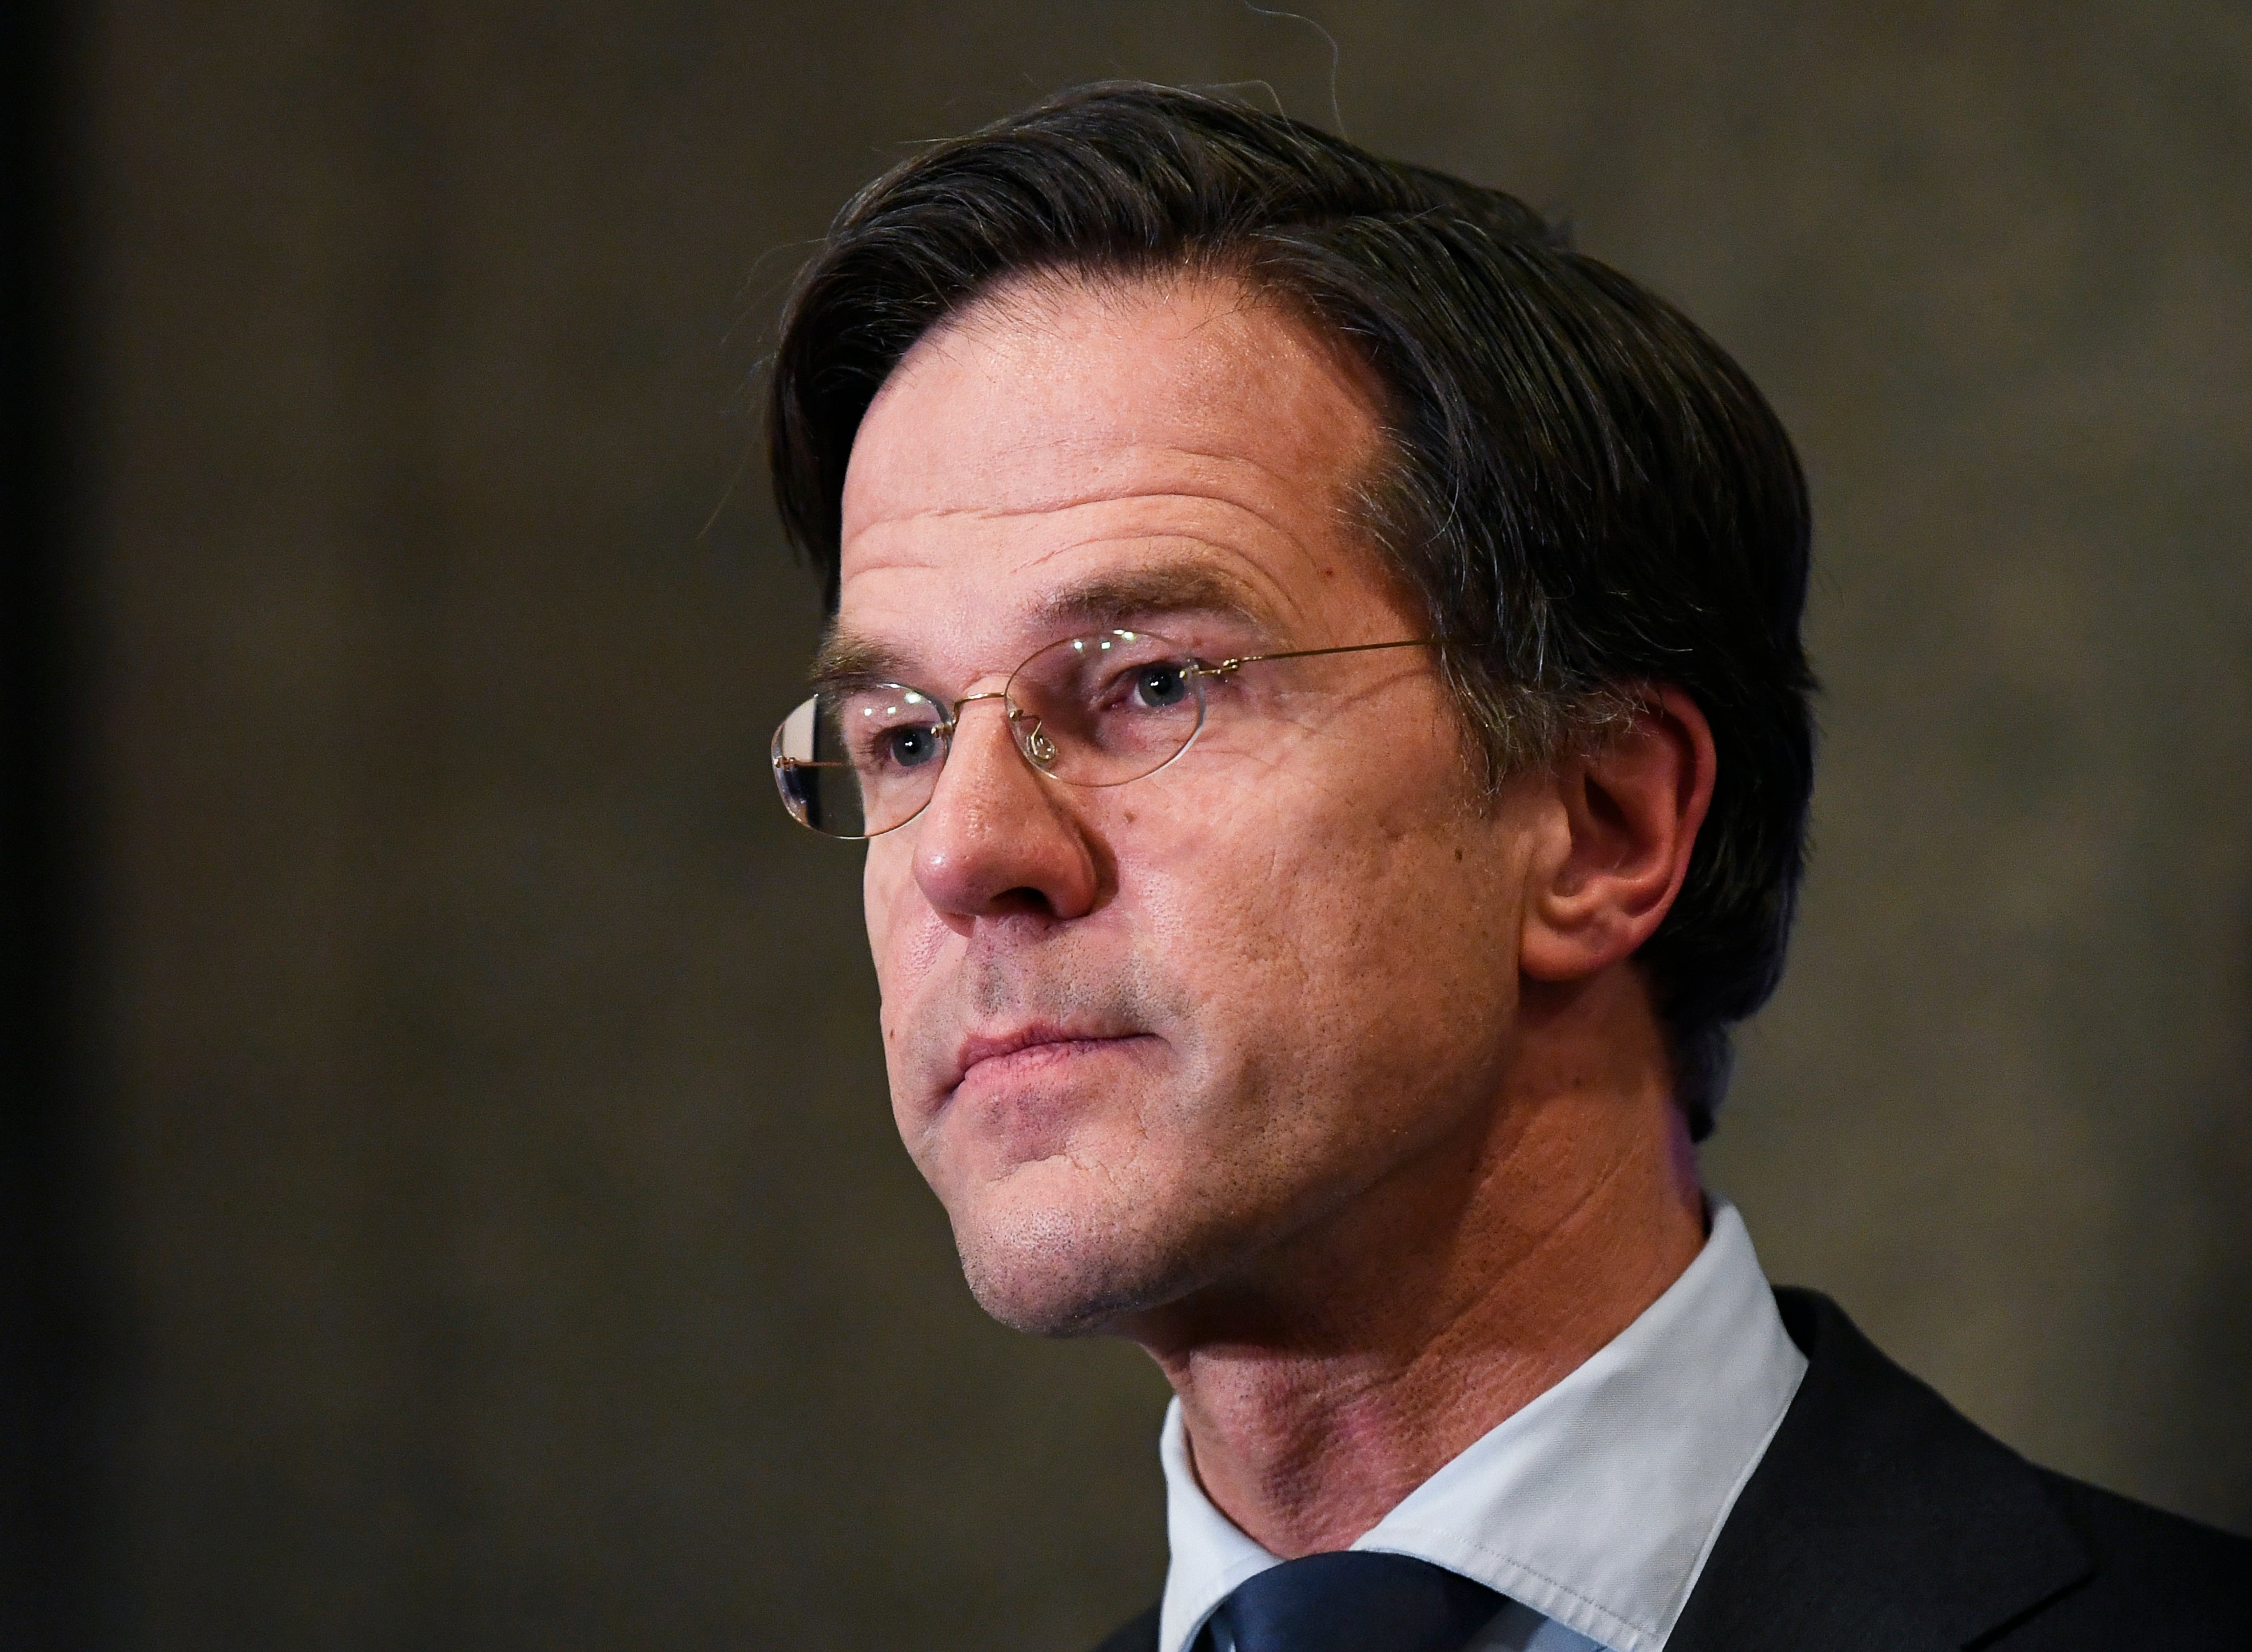 Mark Rutte said a corona pass was needed to prevent a new wave of infections